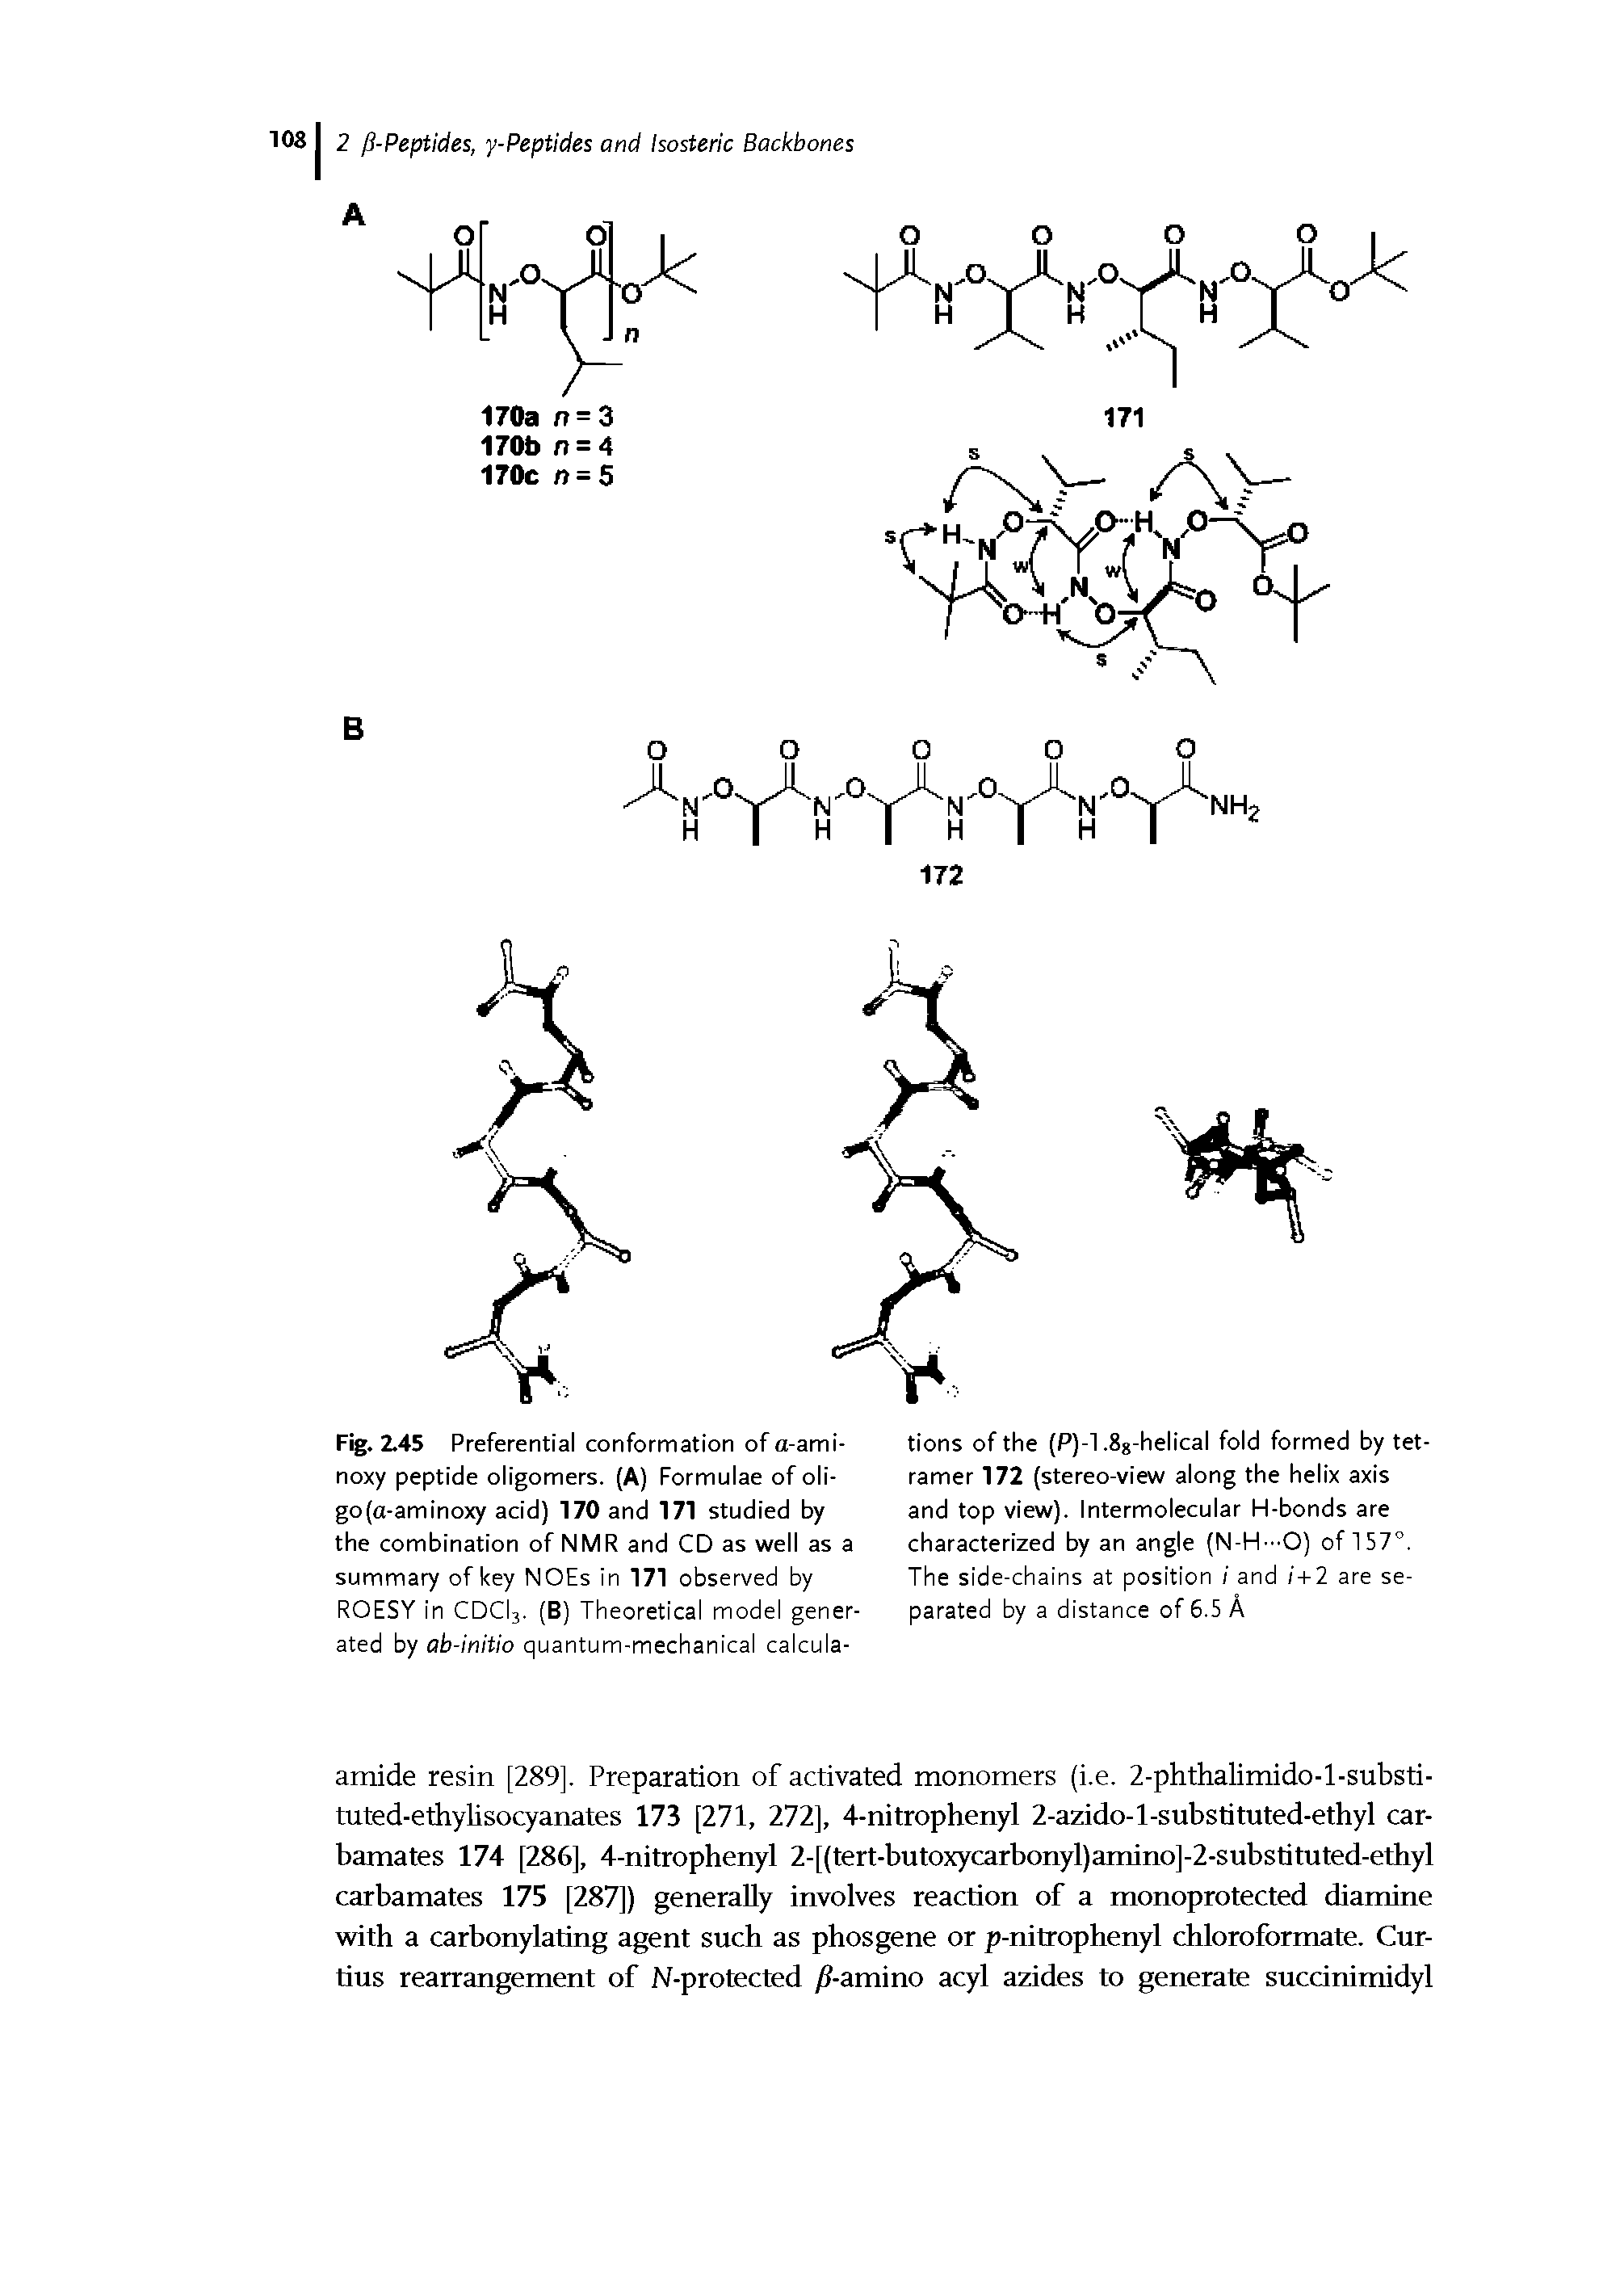 Fig. 2.45 Preferential conformation ofa-ami-noxy peptide oligomers. (A) Formulae of oli-go(a-aminoxy acid) 170 and 171 studied by the combination of NMR and CD as well as a summary of key NOEs in 171 observed by ROESY in CDCI3. (B) Theoretical model generated by ab-initio quantum-mechanical calcula-...